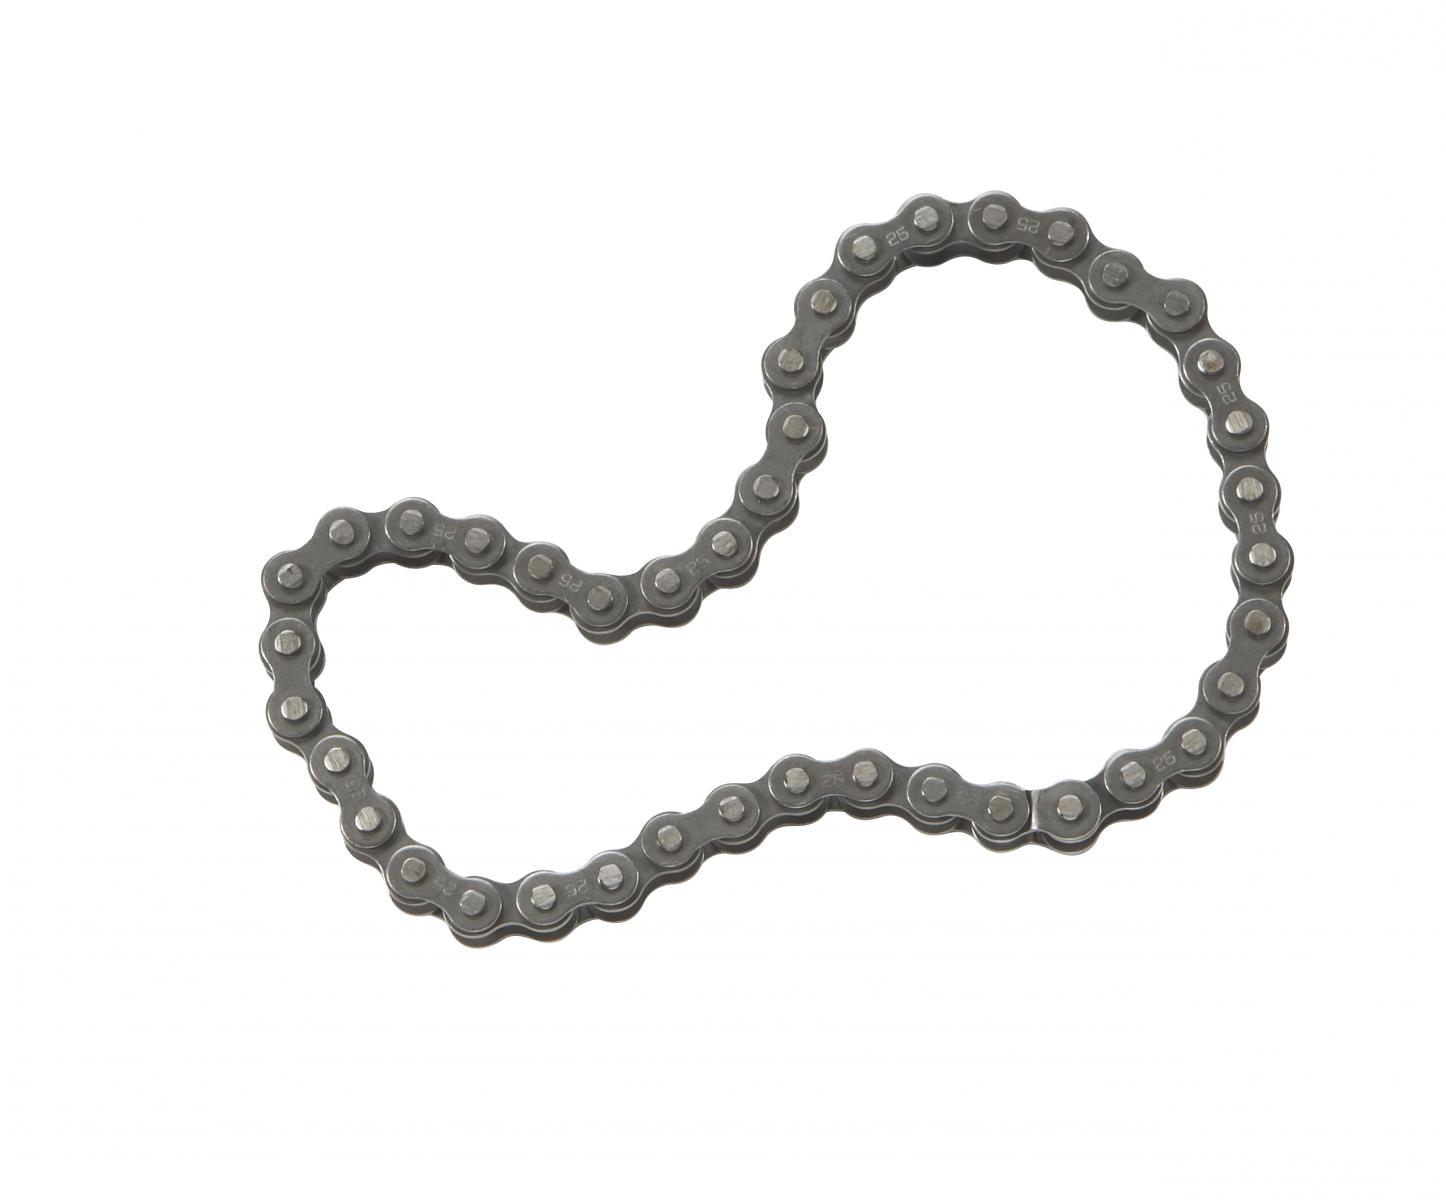 TapeTech® Drive Chain SST. Part number 058126F